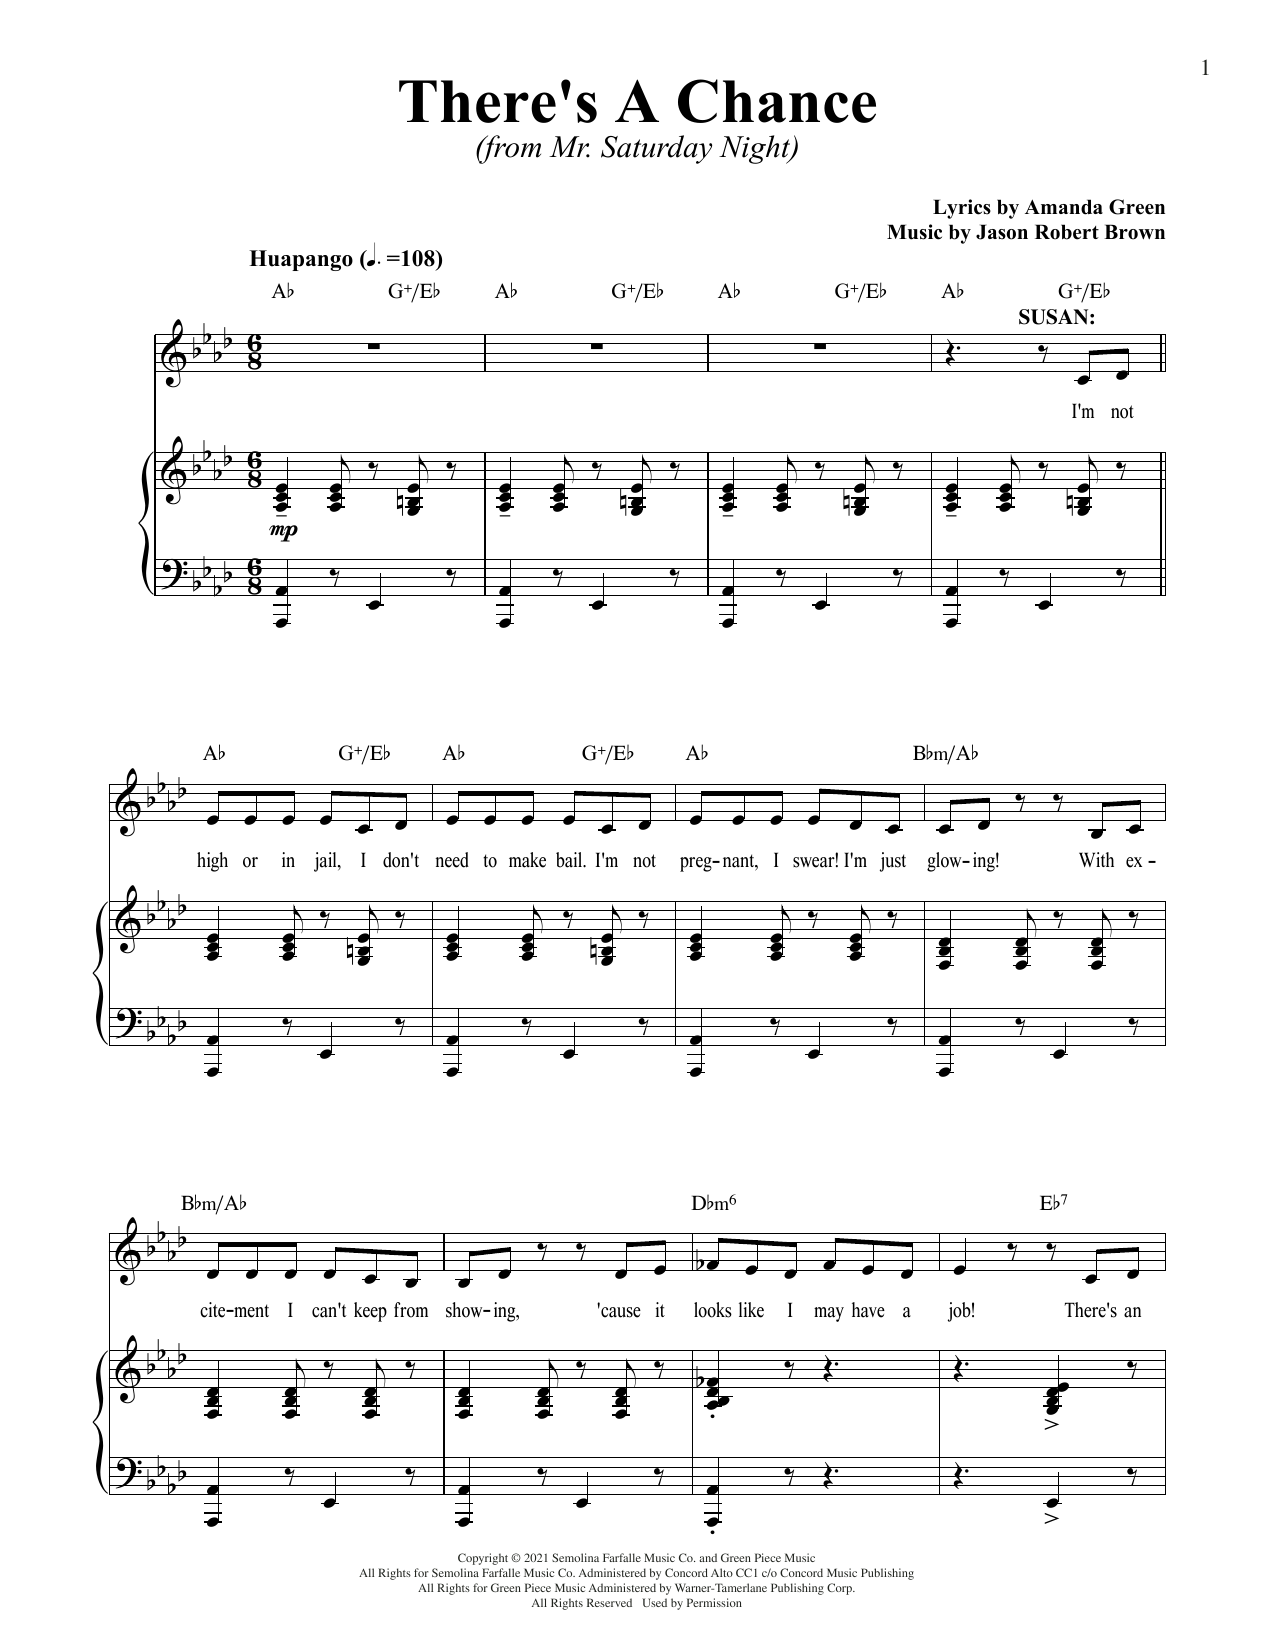 Jason Robert Brown and Amanda Green There's A Chance (from Mr. Saturday Night) sheet music notes printable PDF score